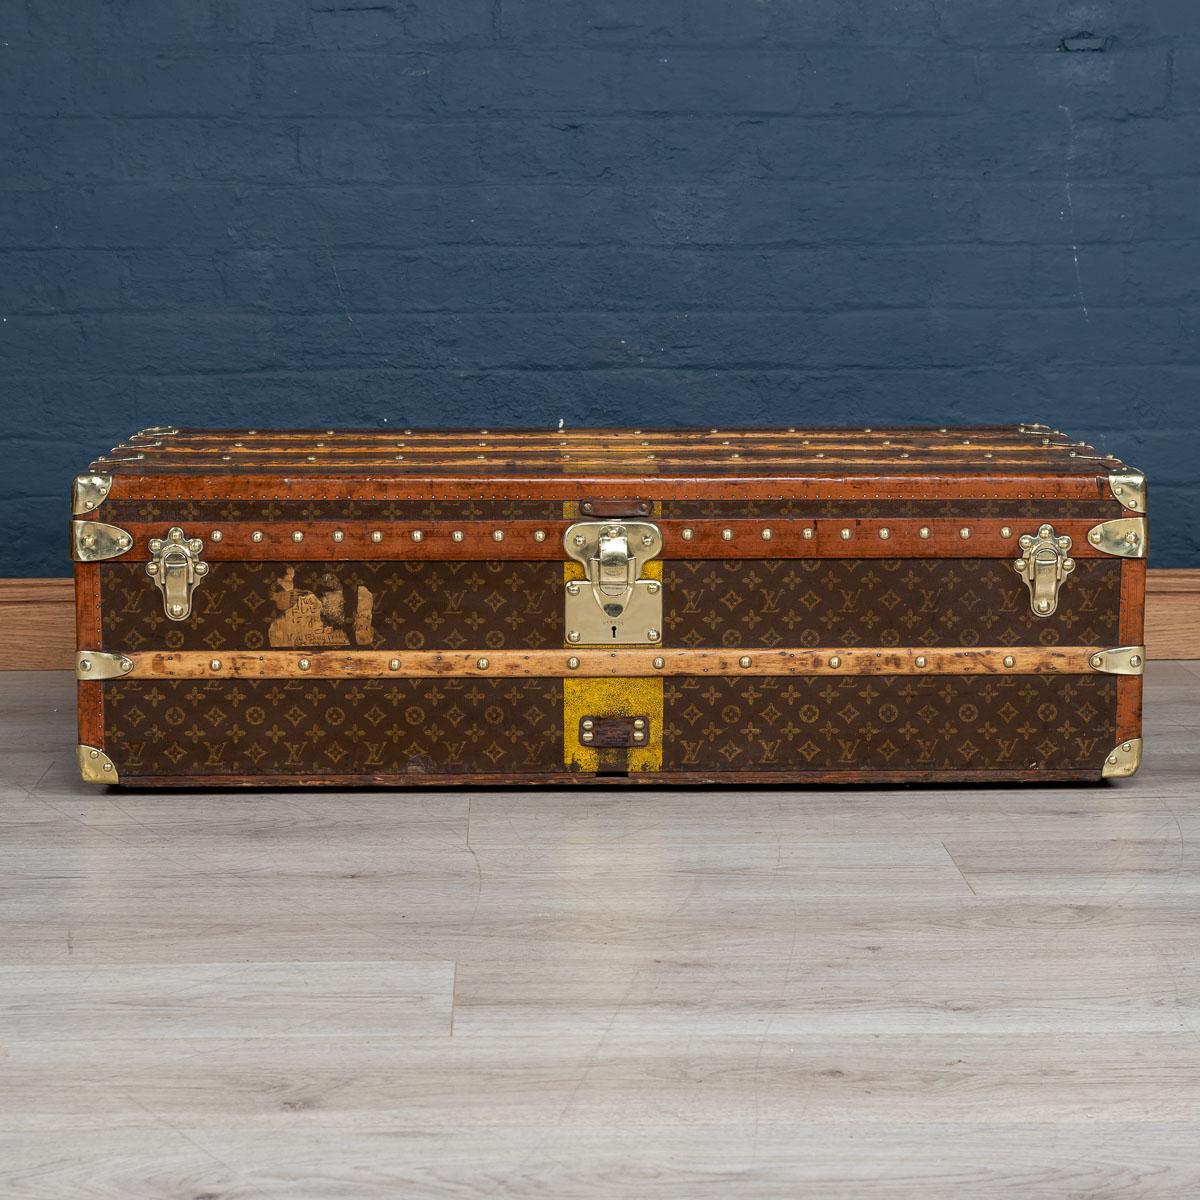 Antique early 20th century Louis Vuitton trunk covered in the world famous LV monogrammed canvas, with its lozine borders and brass fitting this trunk would have been the top of the line even at the time of purchase over 100 years ago.

This